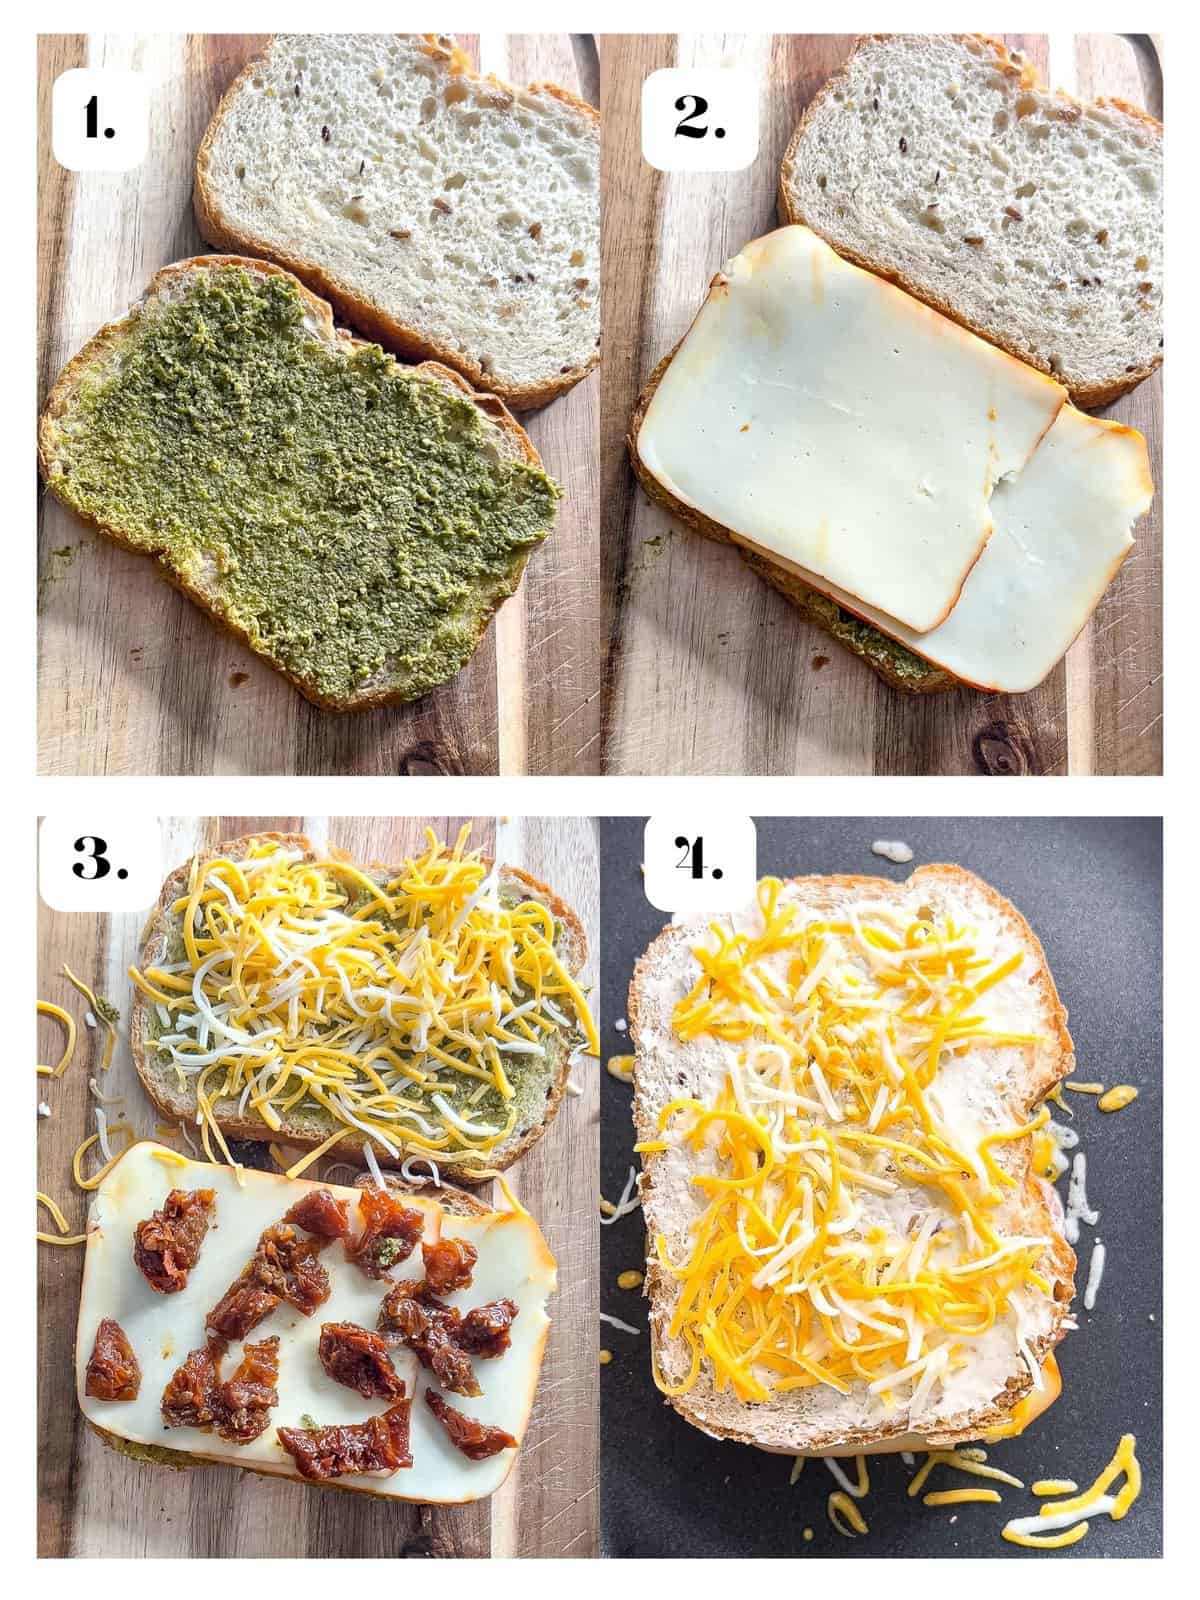 instructions to build the pesto grilled cheese